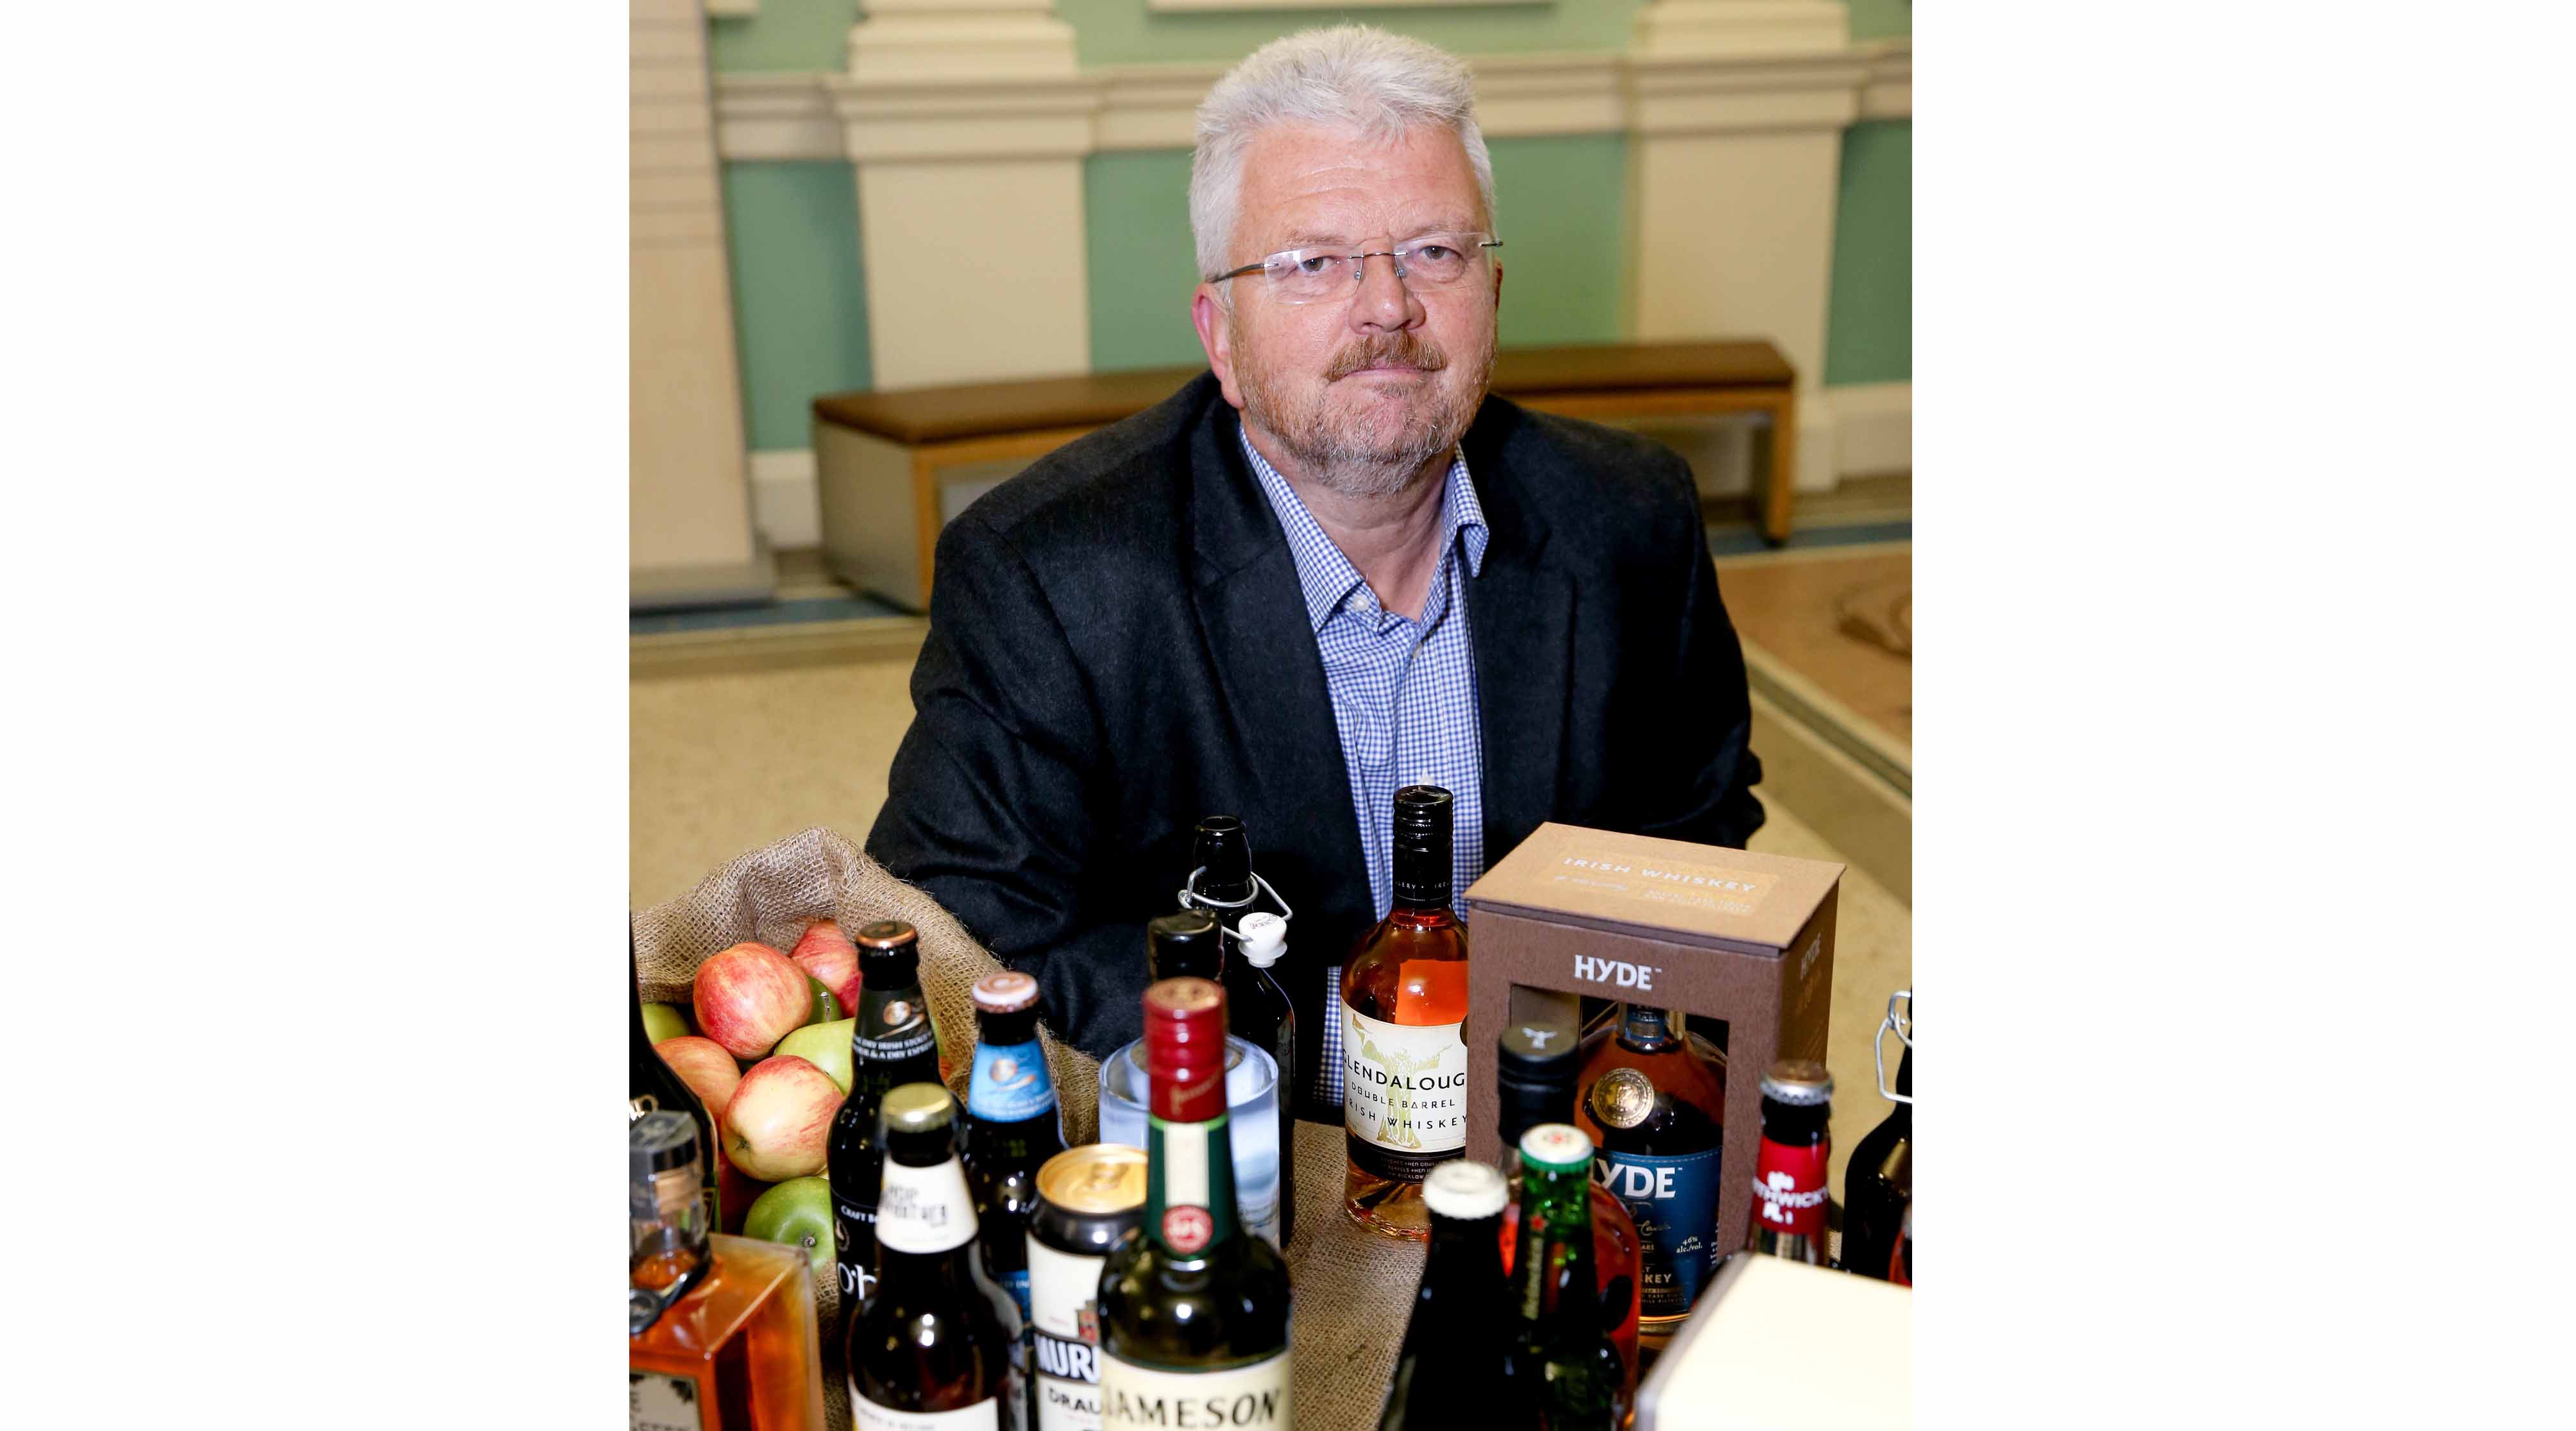 “Despite the hard work going on across Government departments to try to protect the sector against the impact of Brexit, the unintended economic consequences of the Public Health (Alcohol) Bill will only serve to exacerbate pressure on the sector,” Ciaran Fitzgerald told the Seanad Committee.